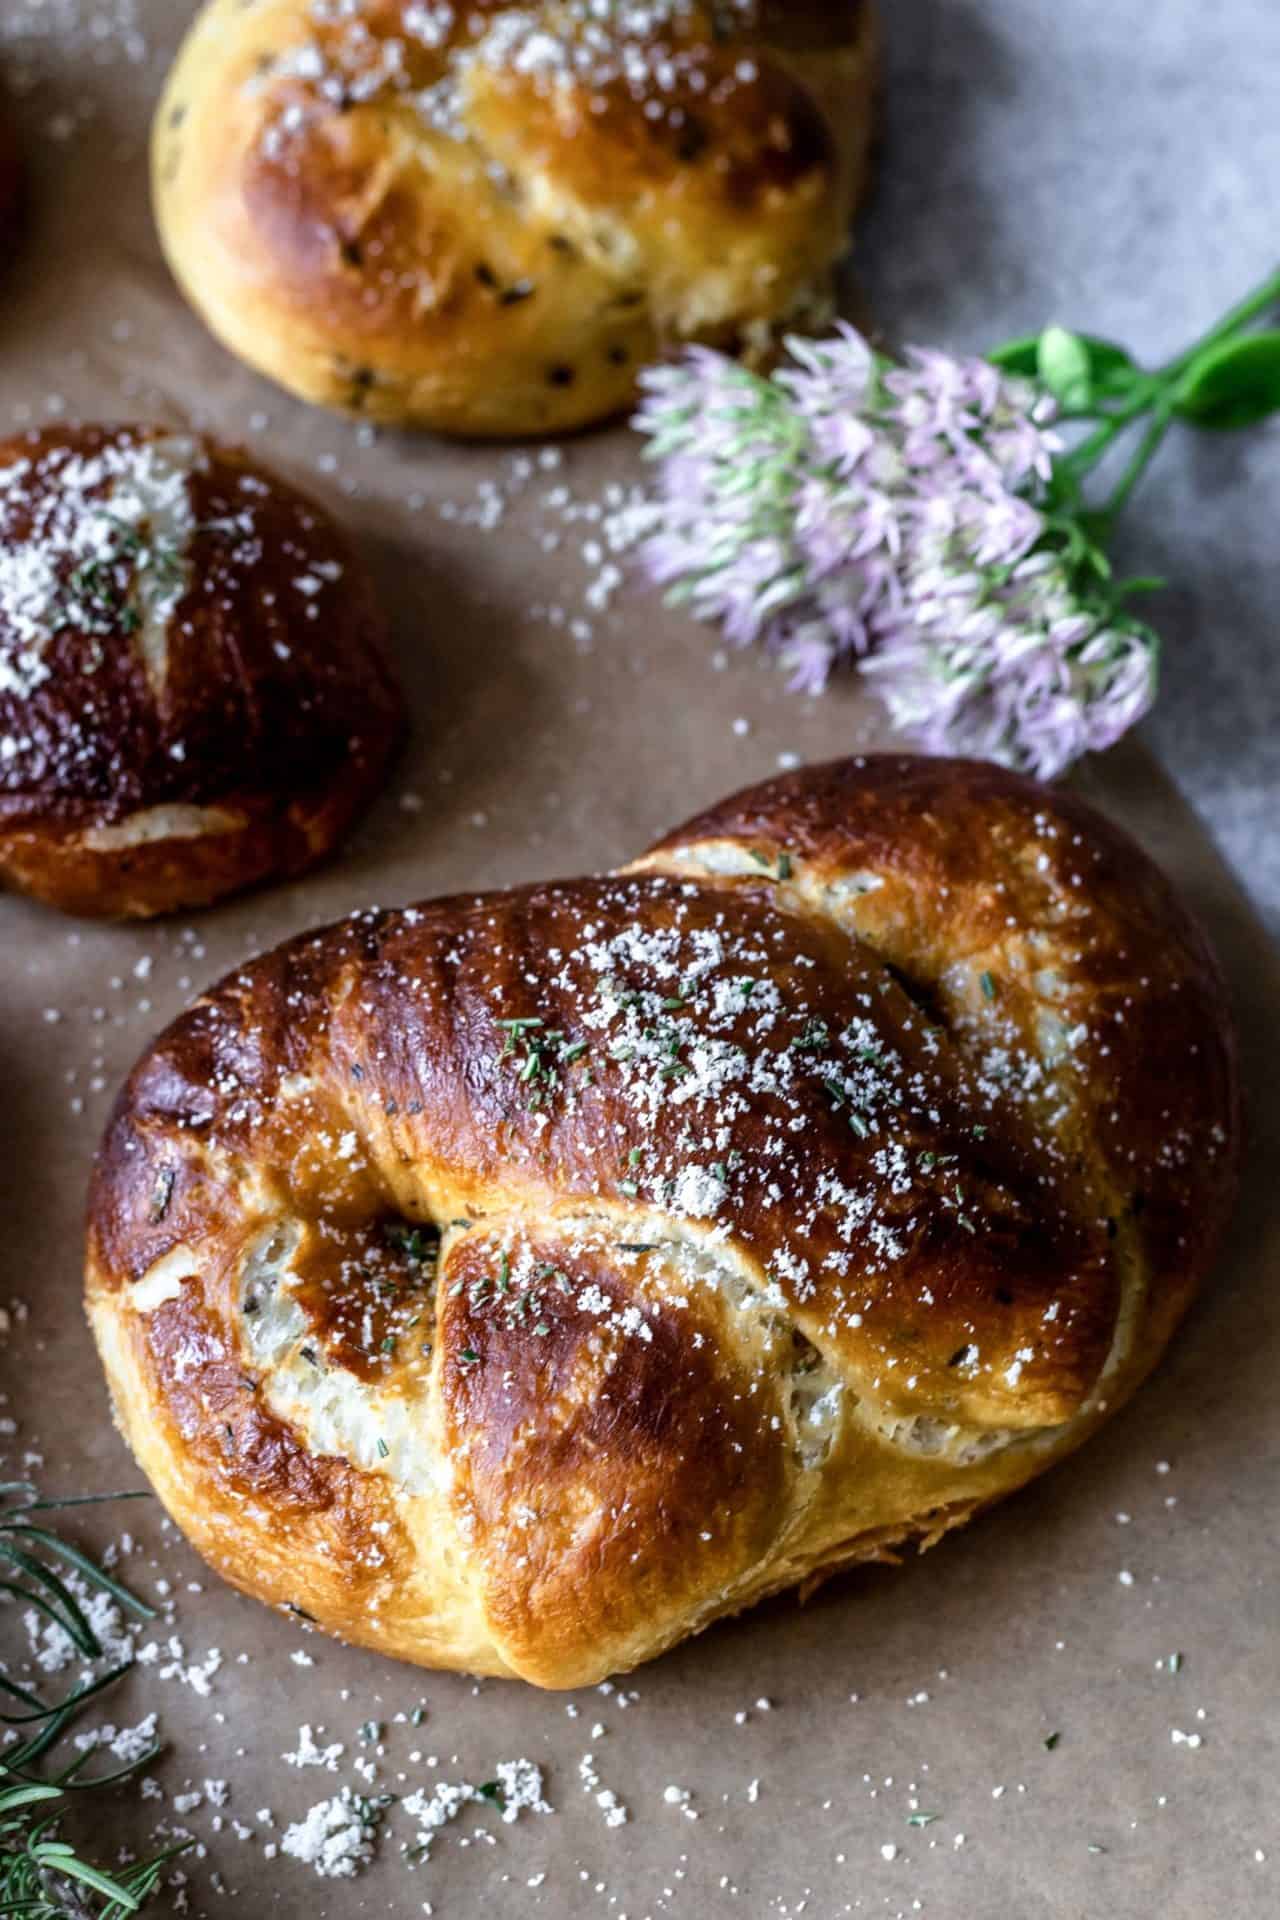 These Gluten-Free Soft Pretzels are chewy, pillowy soft, flavorful, super delicious plus low FODMAP and easy to digest.
